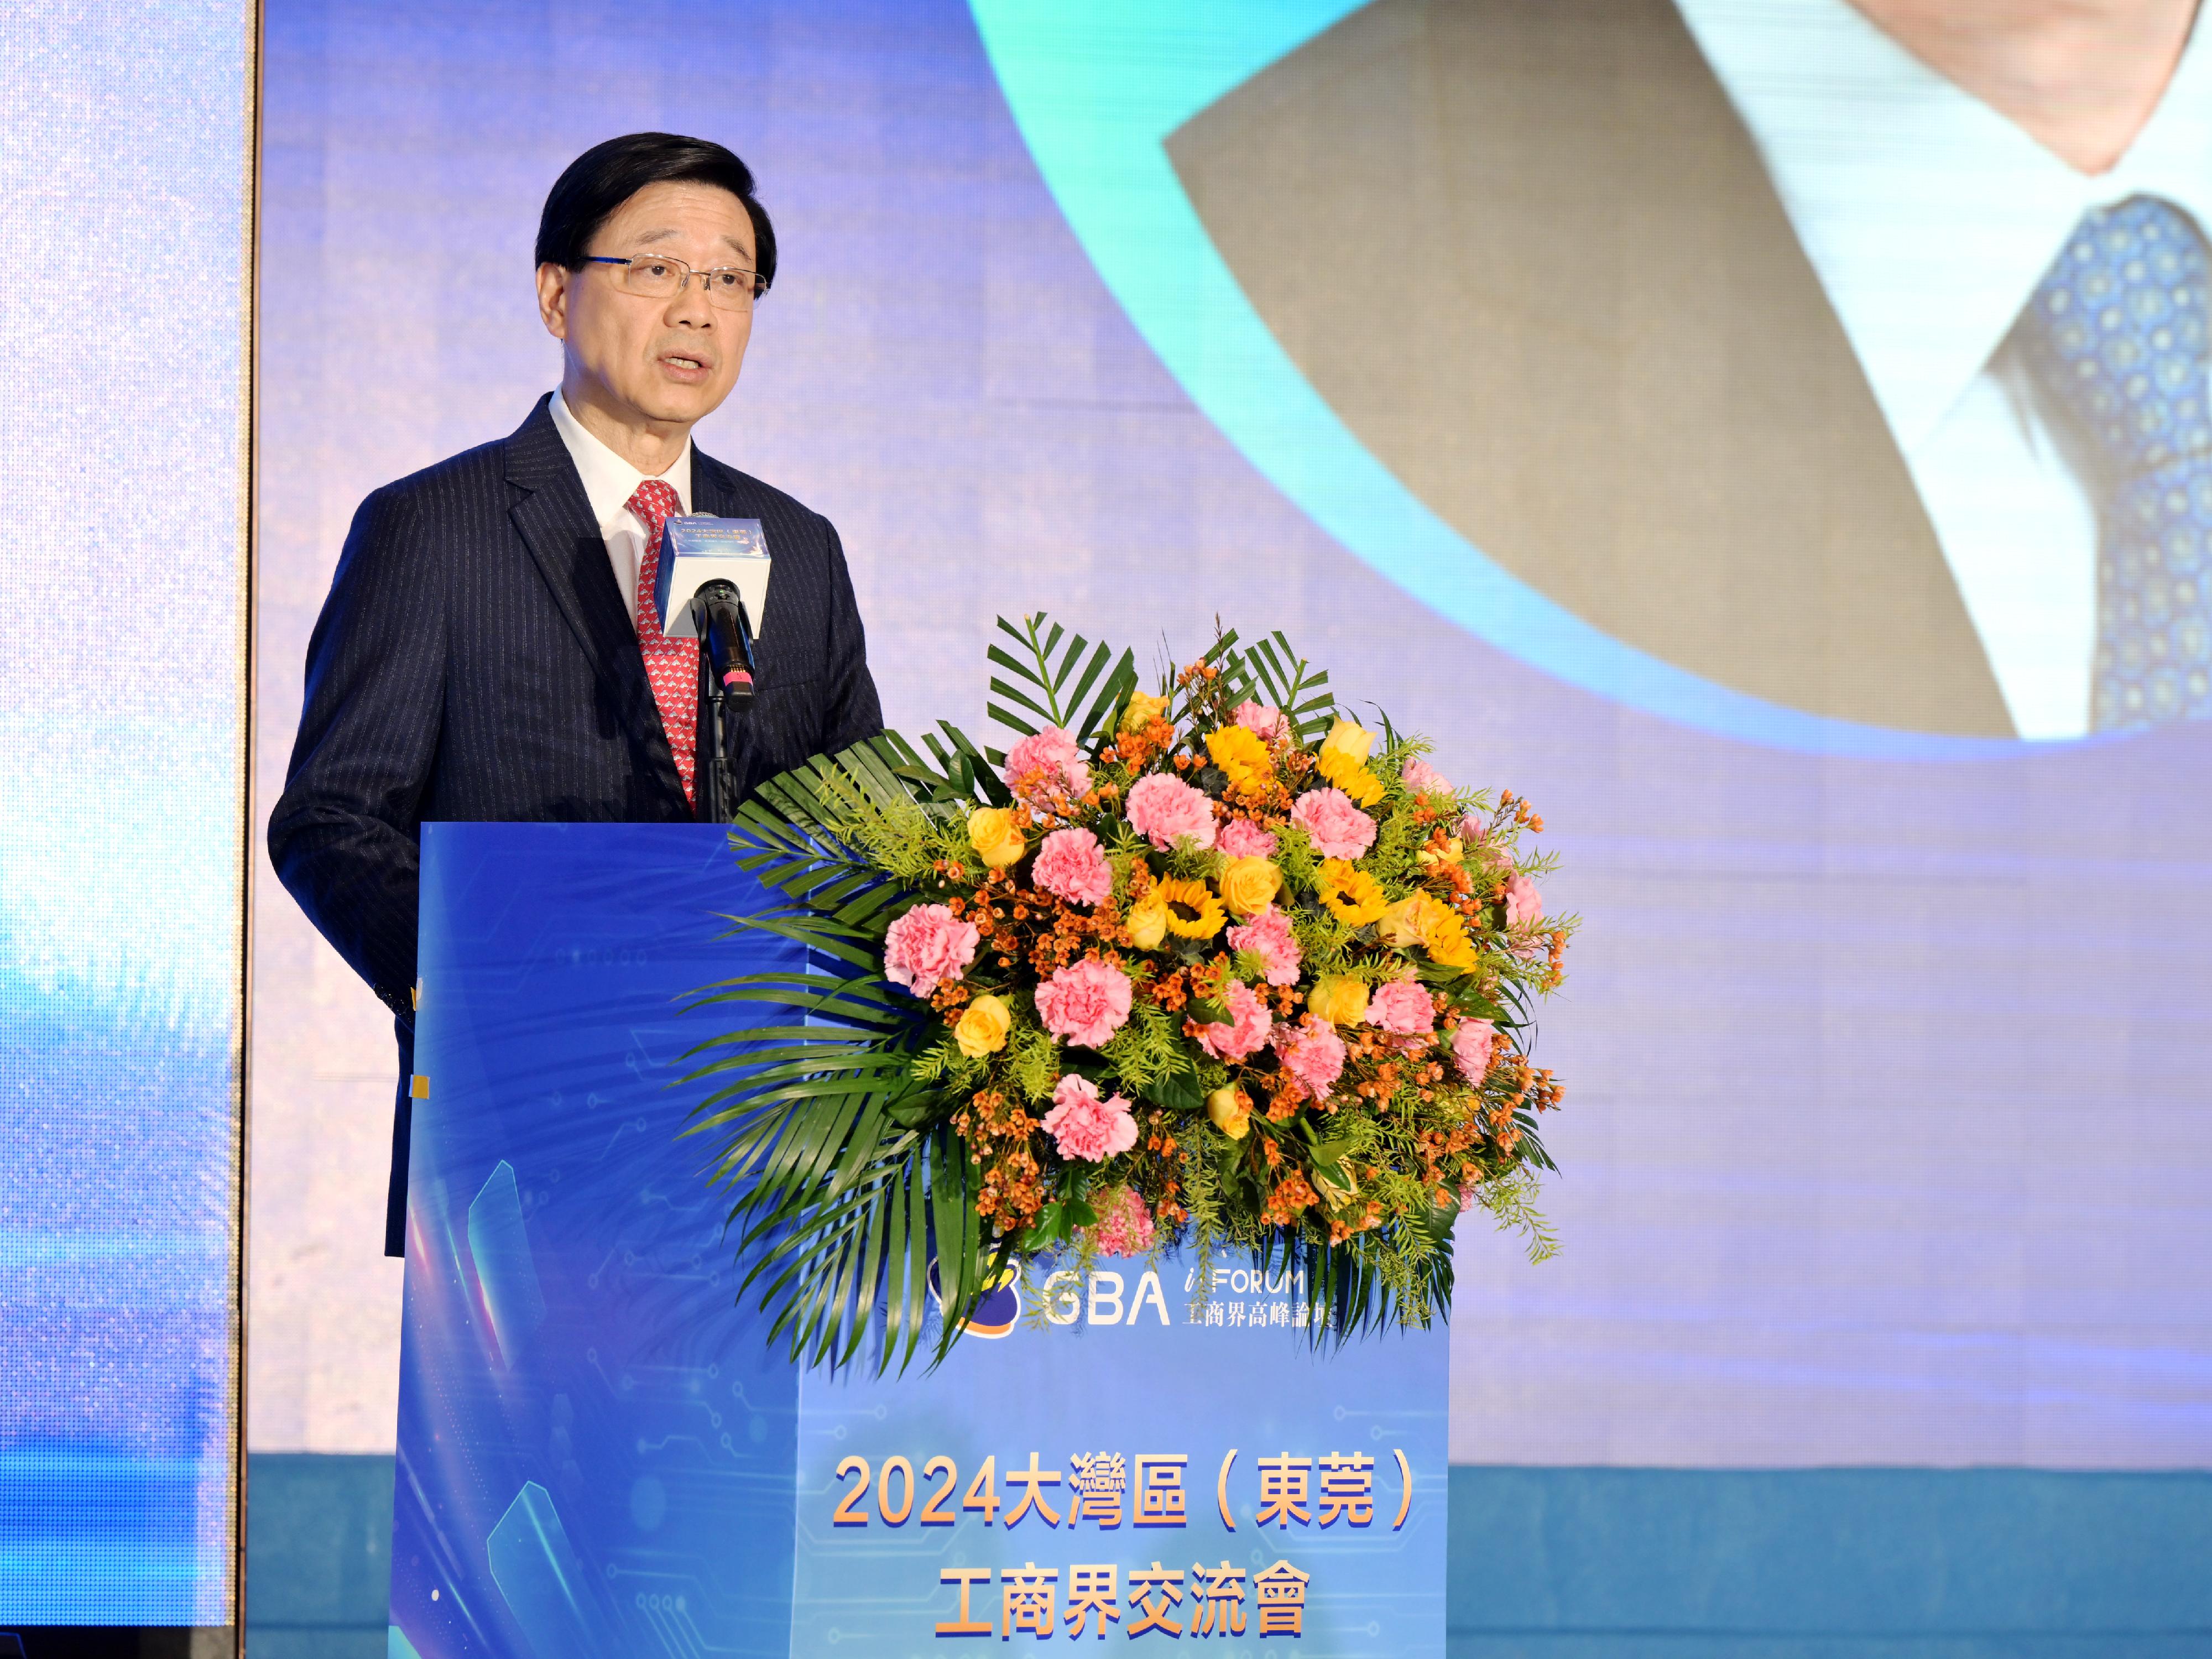 The Chief Executive, Mr John Lee, attended the dinner session of the 2024 GBA iForum cum Dinner hosted by the Federation of Hong Kong Industries in Dongguan today (January 4). Photo shows Mr Lee speaking at the dinner event.